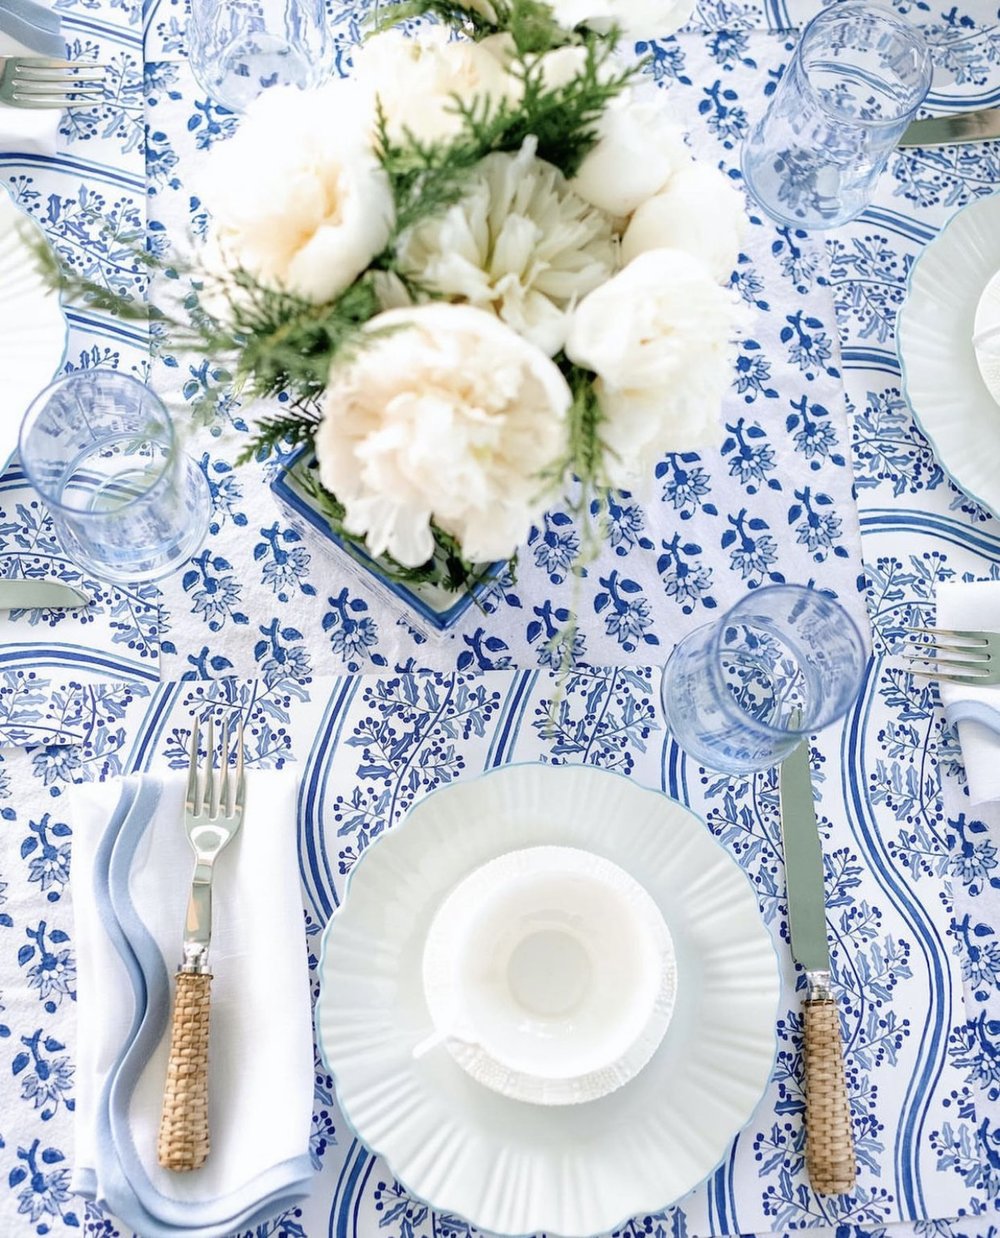 Blue and white holiday table setting